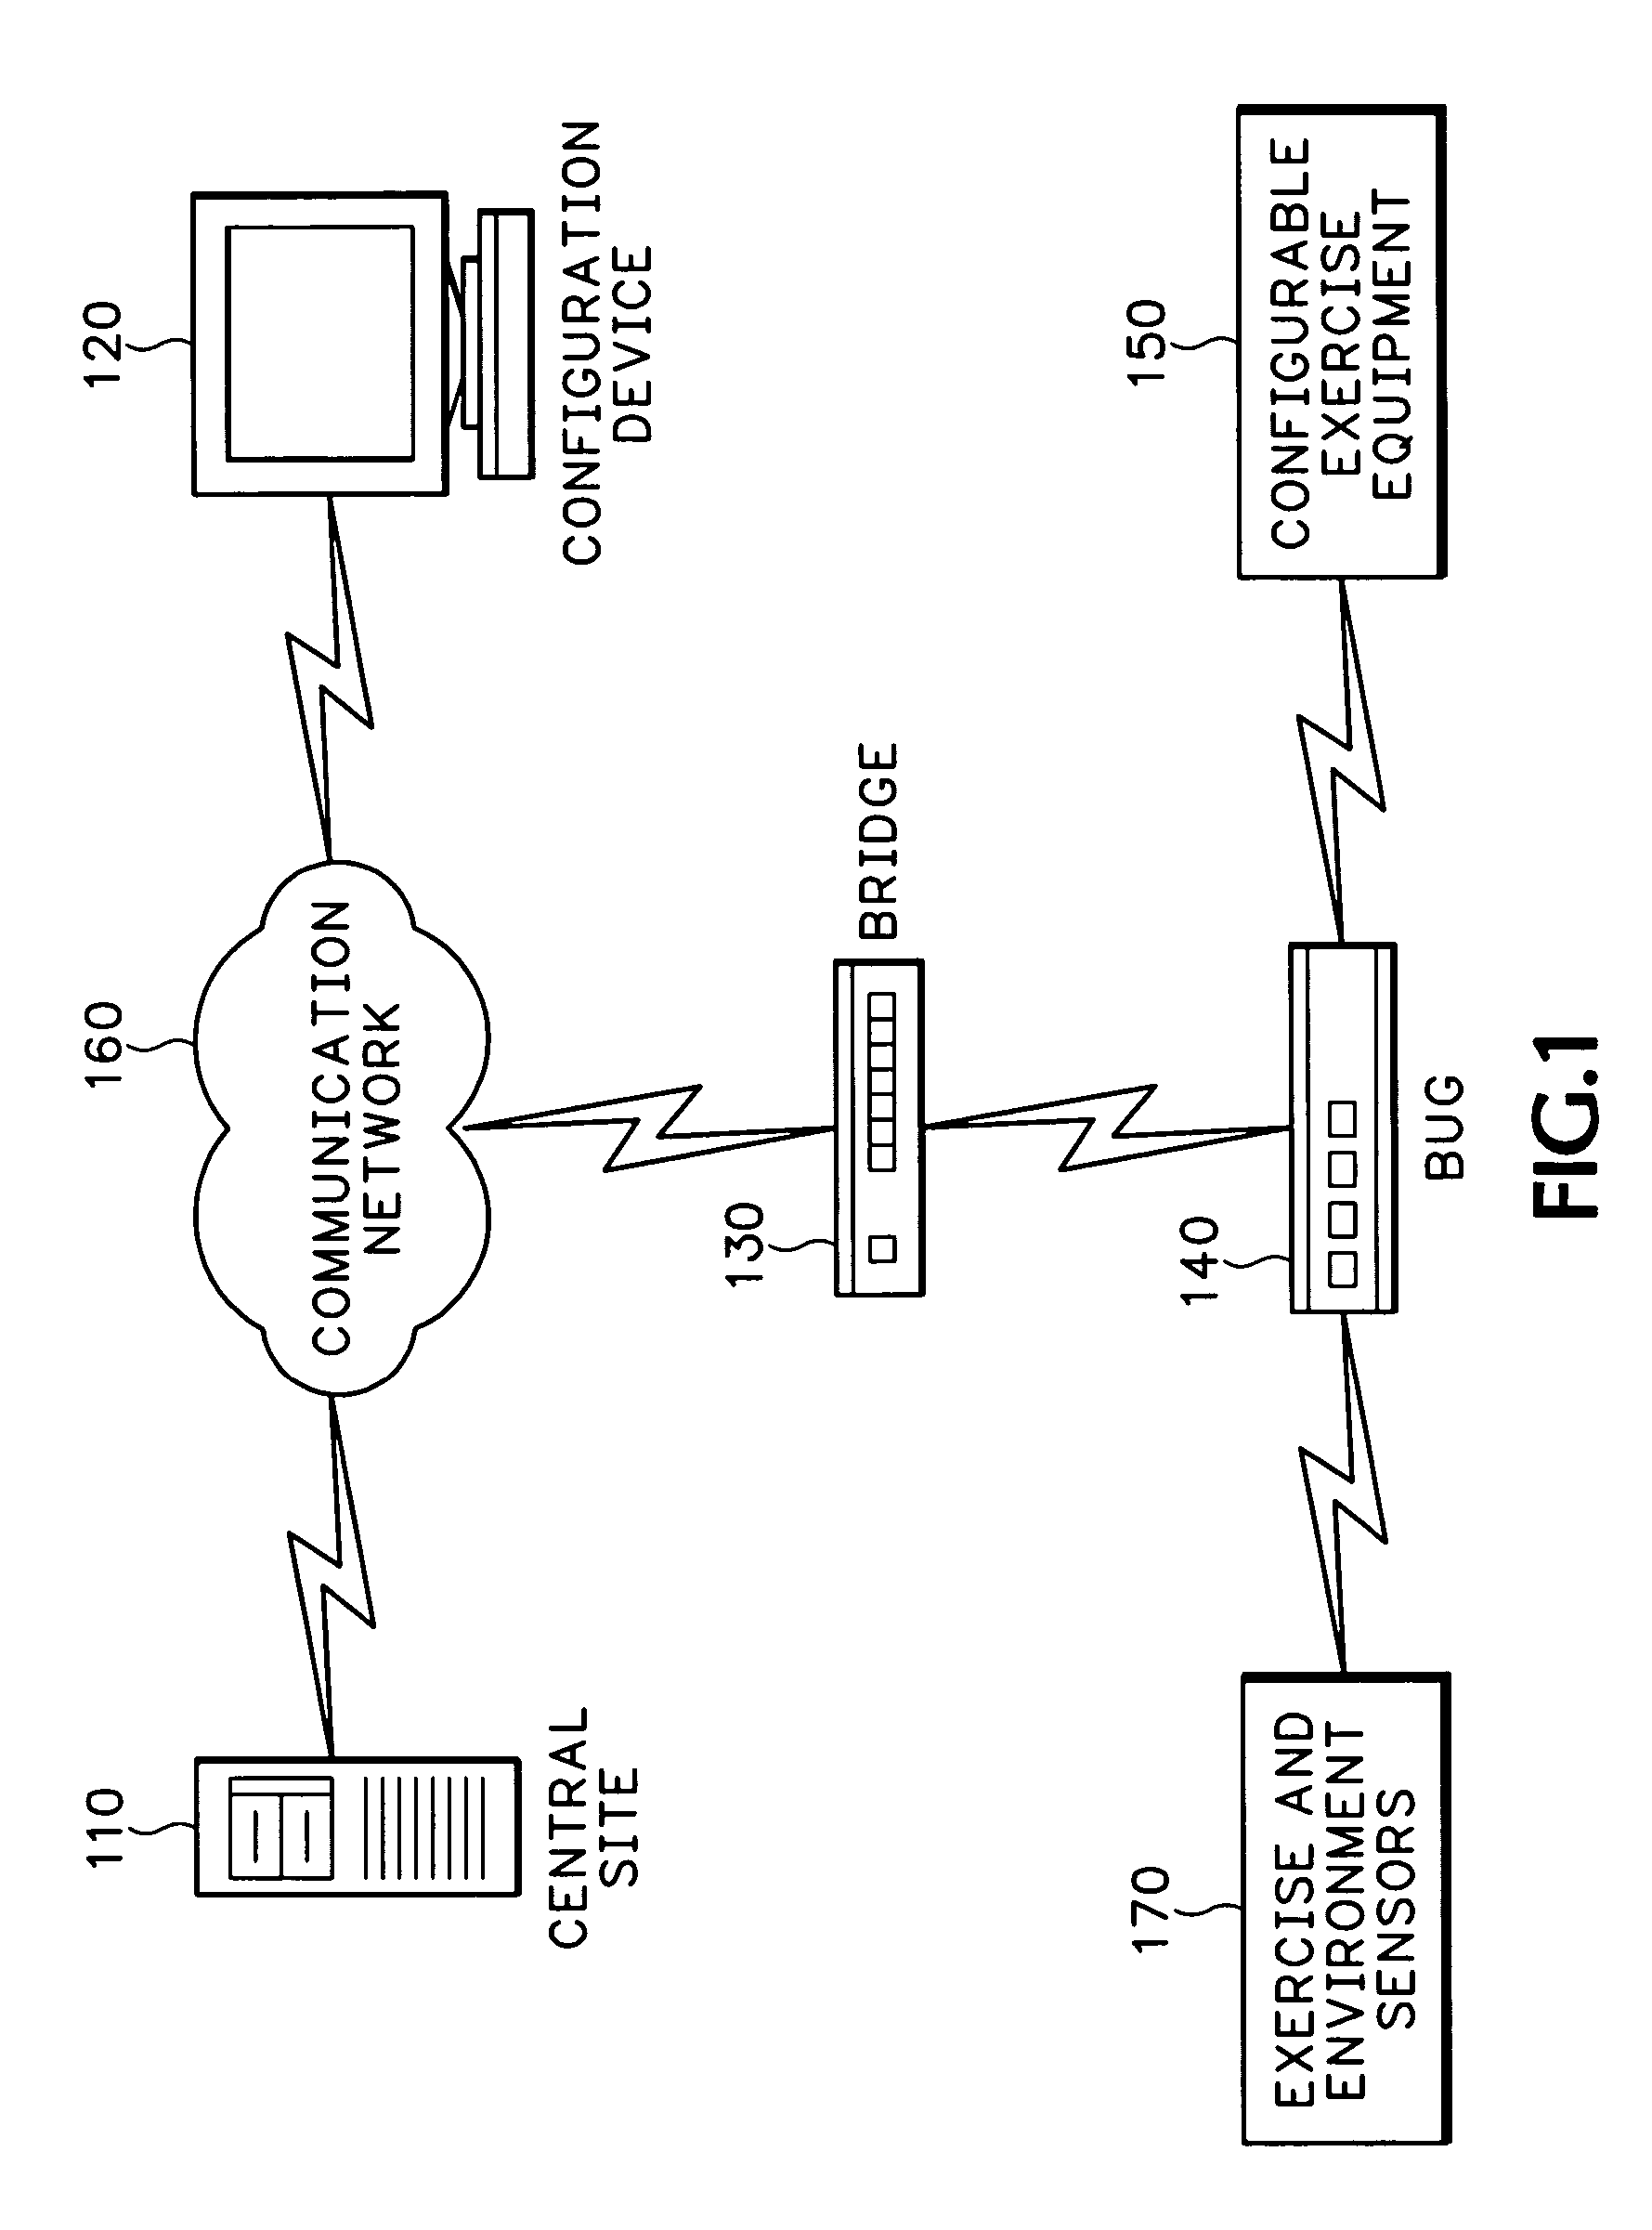 System for regulating exercise and exercise network